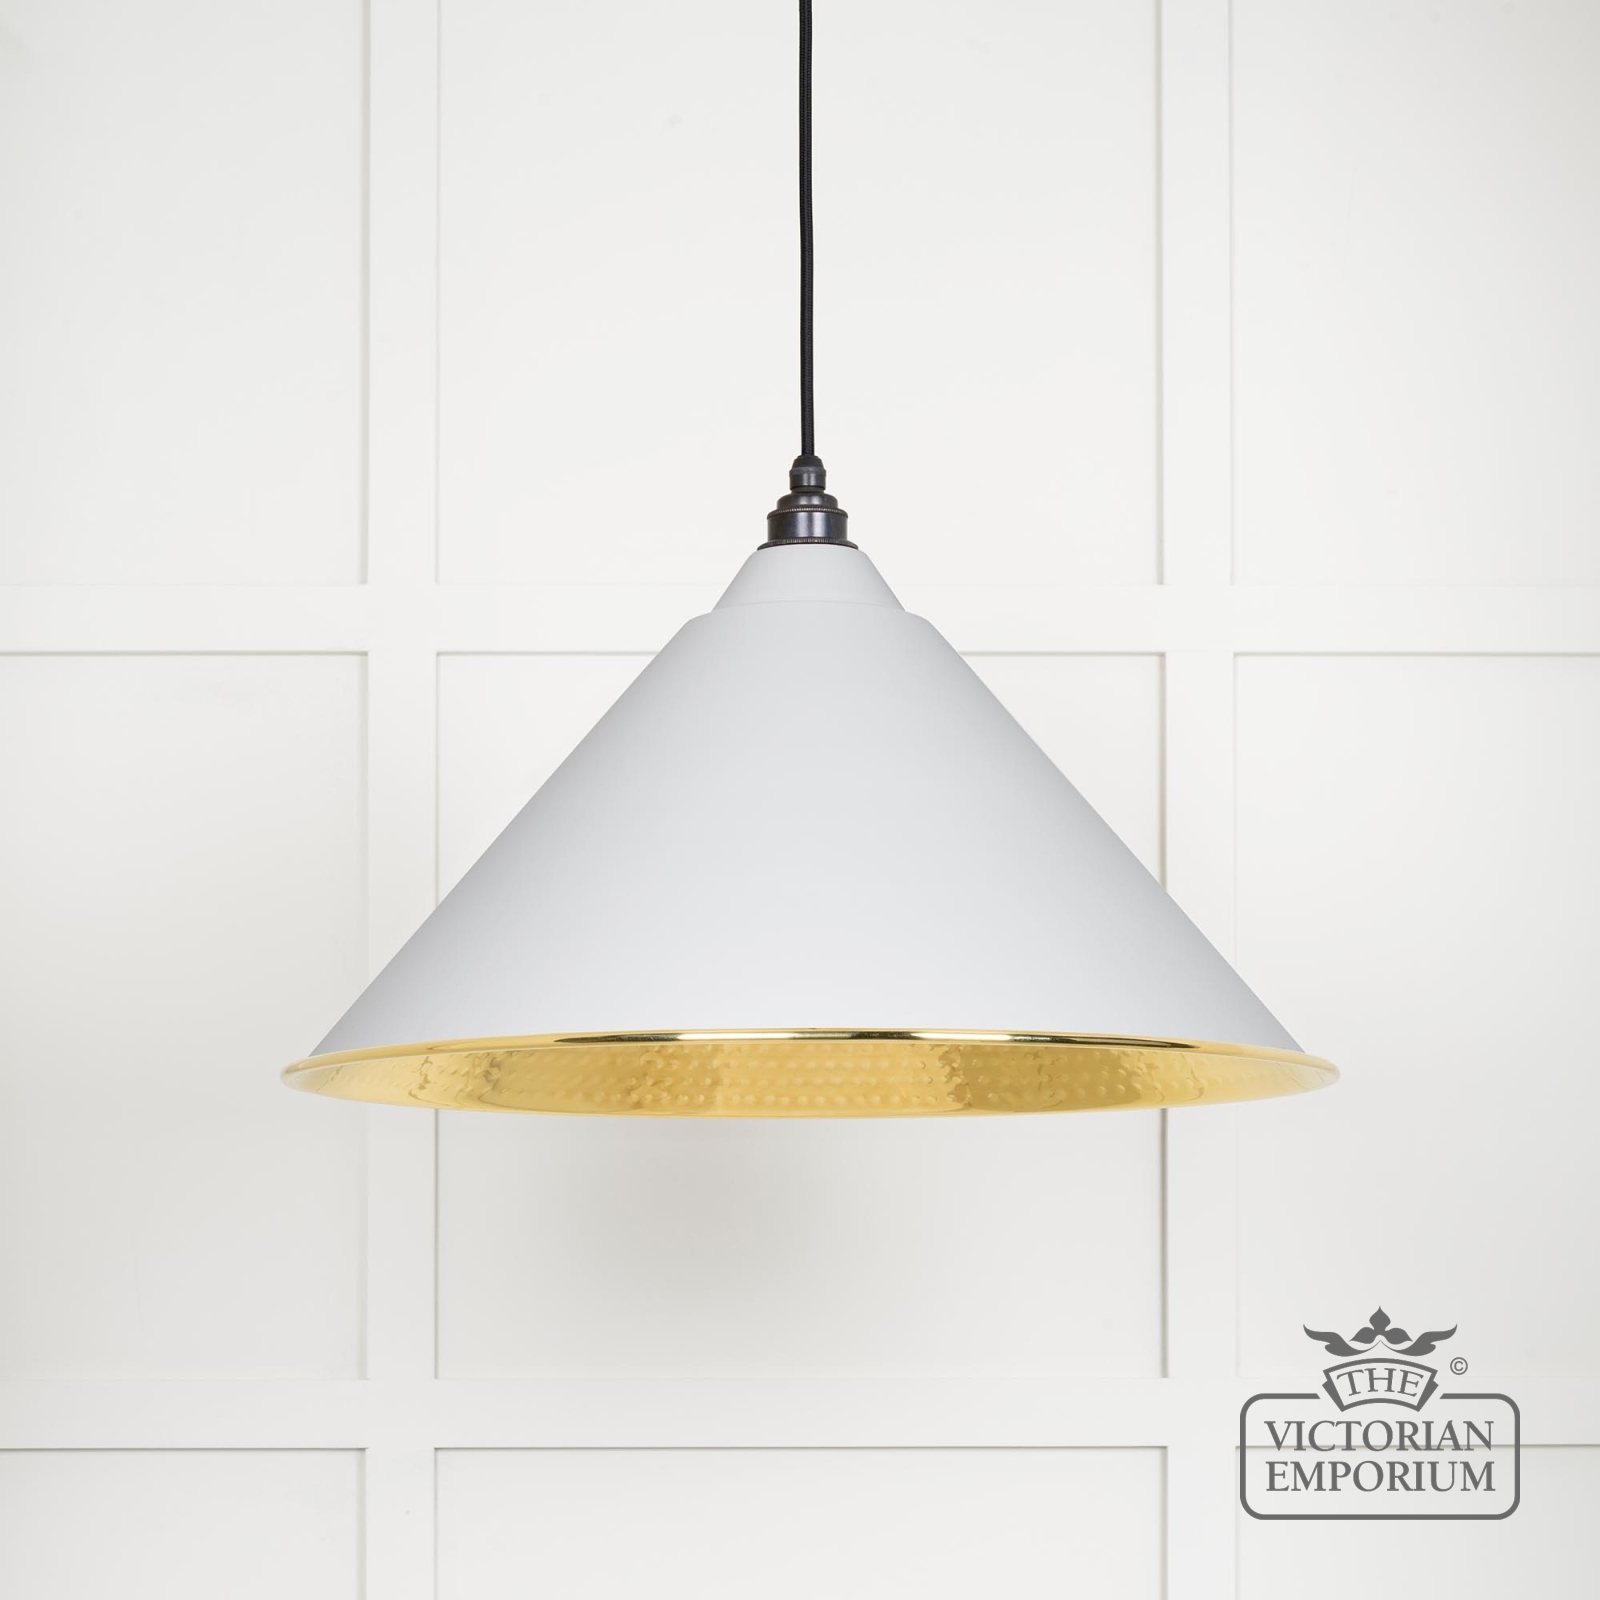 Hockliffe pendant light in Flock and Hammered Brass